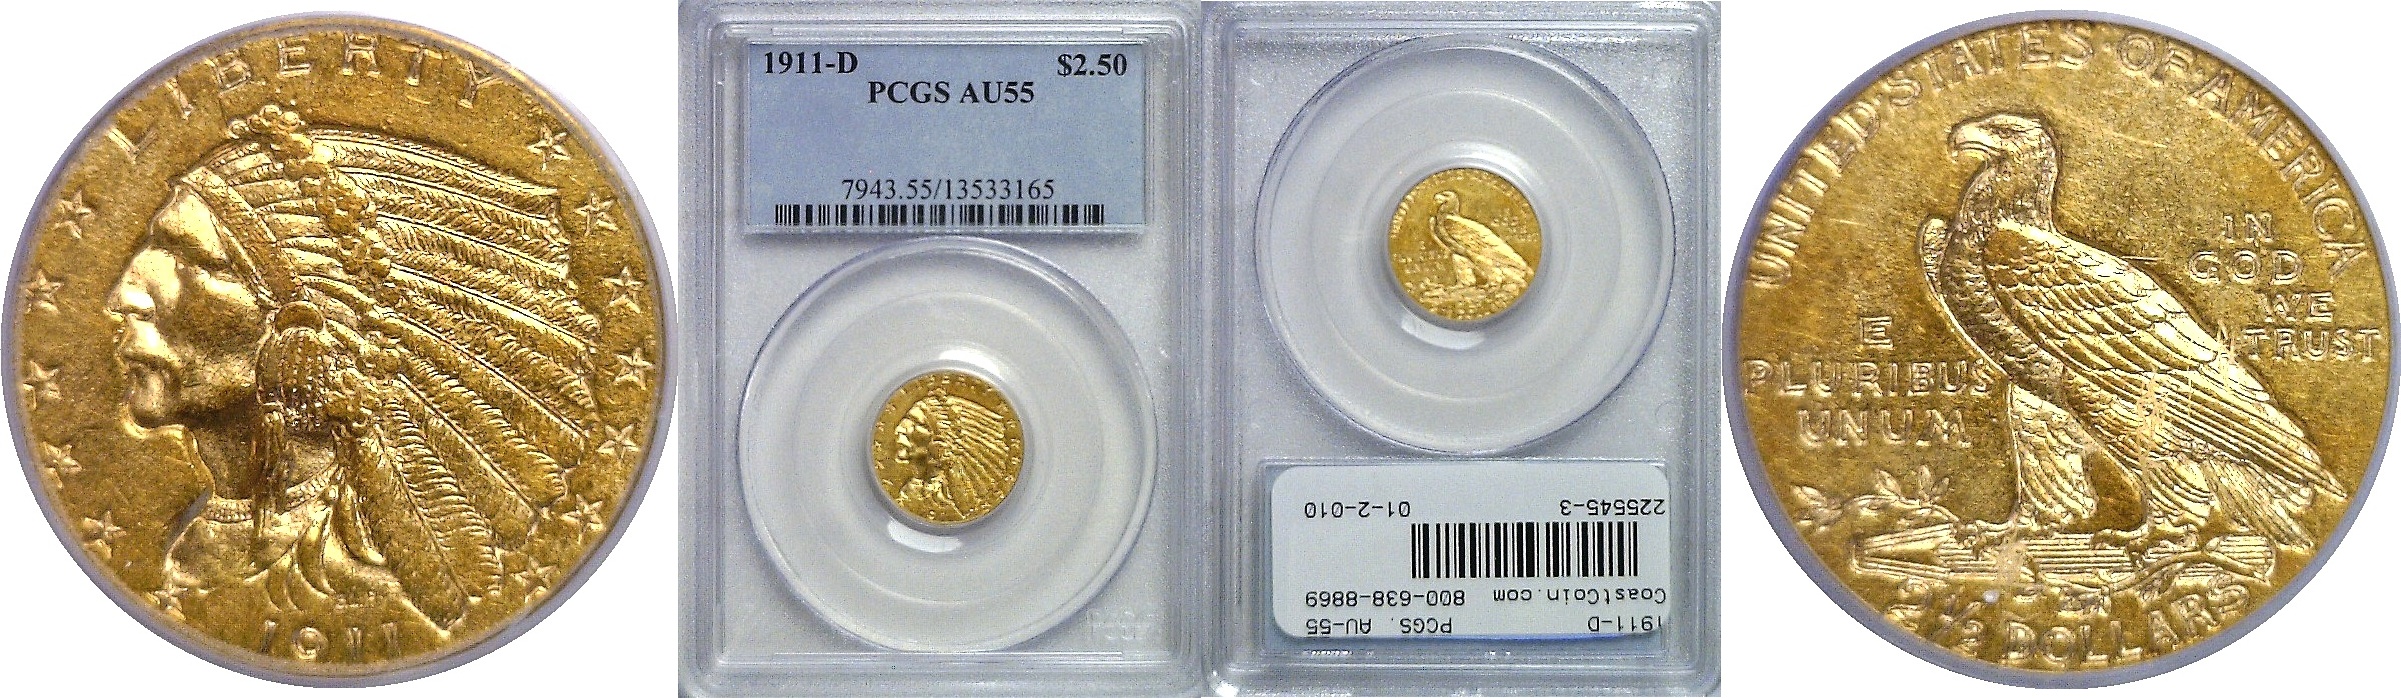 1911-D. PCGS. AU-55. | Two and a Half Dollar Gold Coin | Coast to Coast